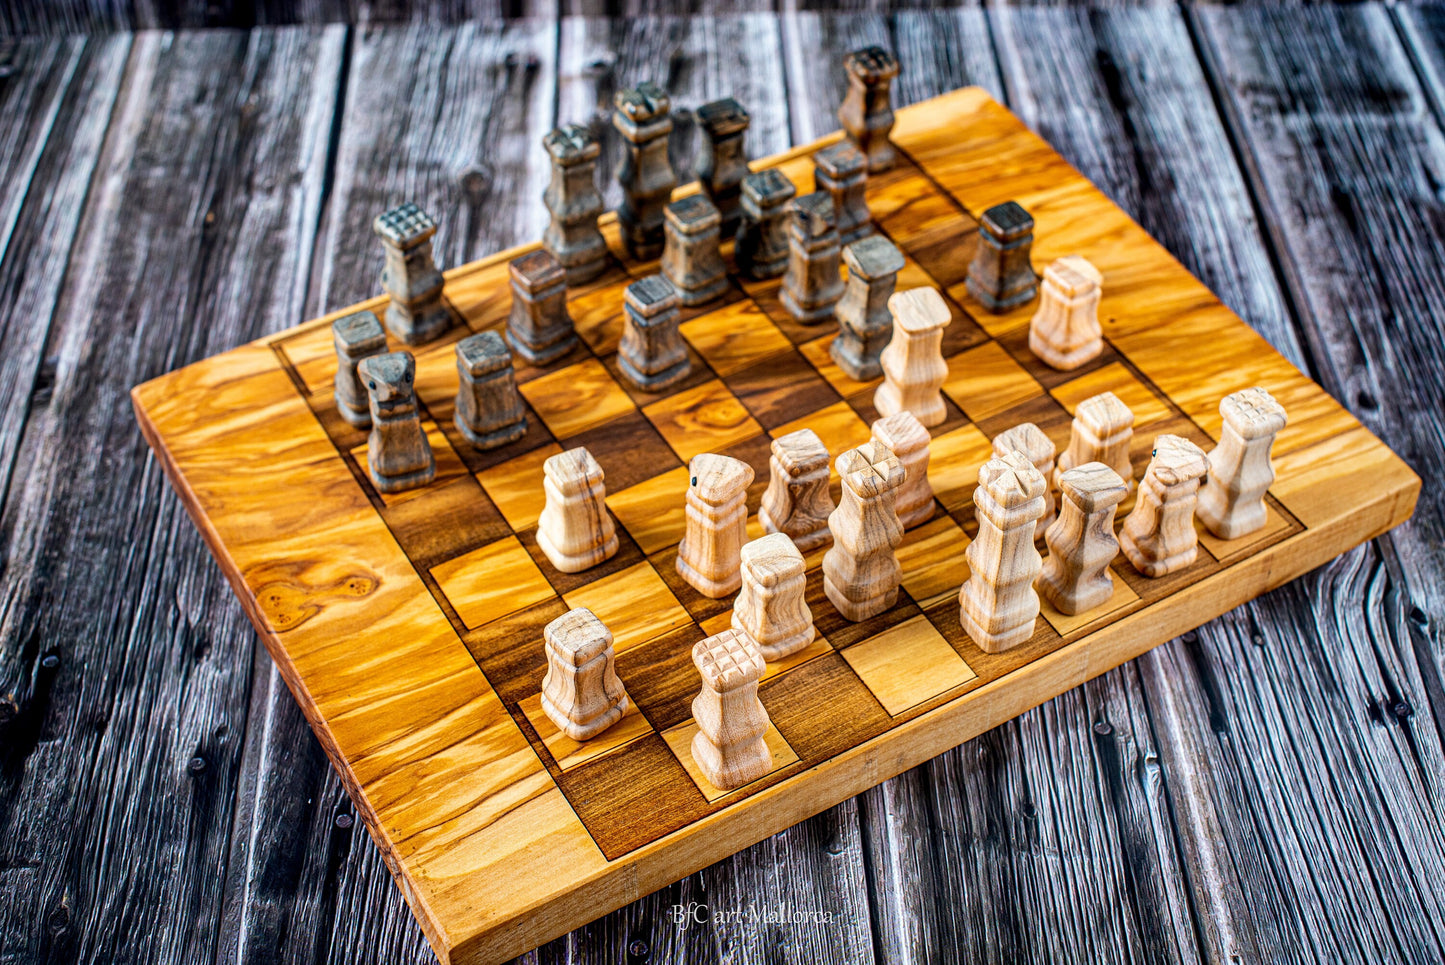 Custom Chess sets with Board Handmade, Olive Wood Chess set Board Game Unique with Chess Pieces